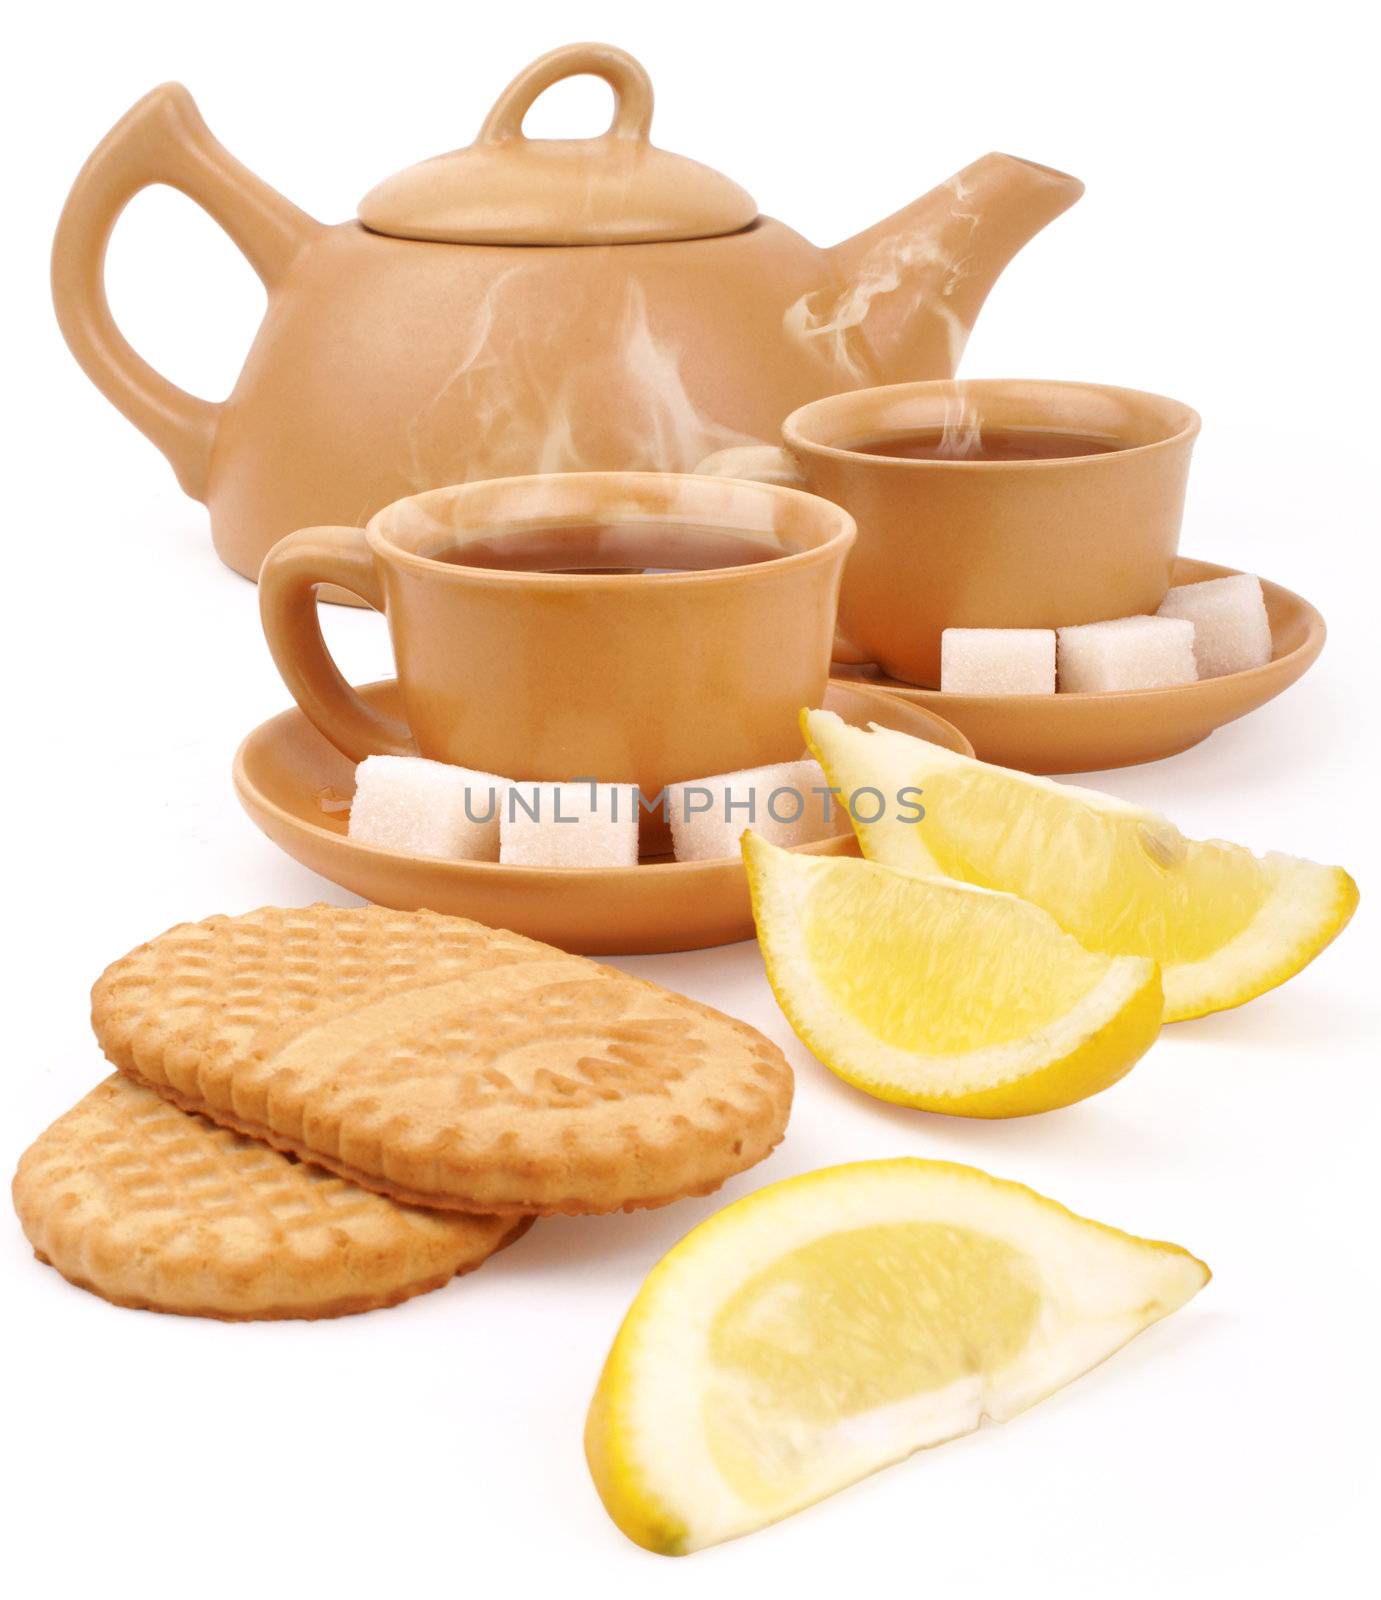 set of the earthenware teapot, two cups of tea, lump shugar, sliced lemon and biscuits isolated on white background with clipping path                     